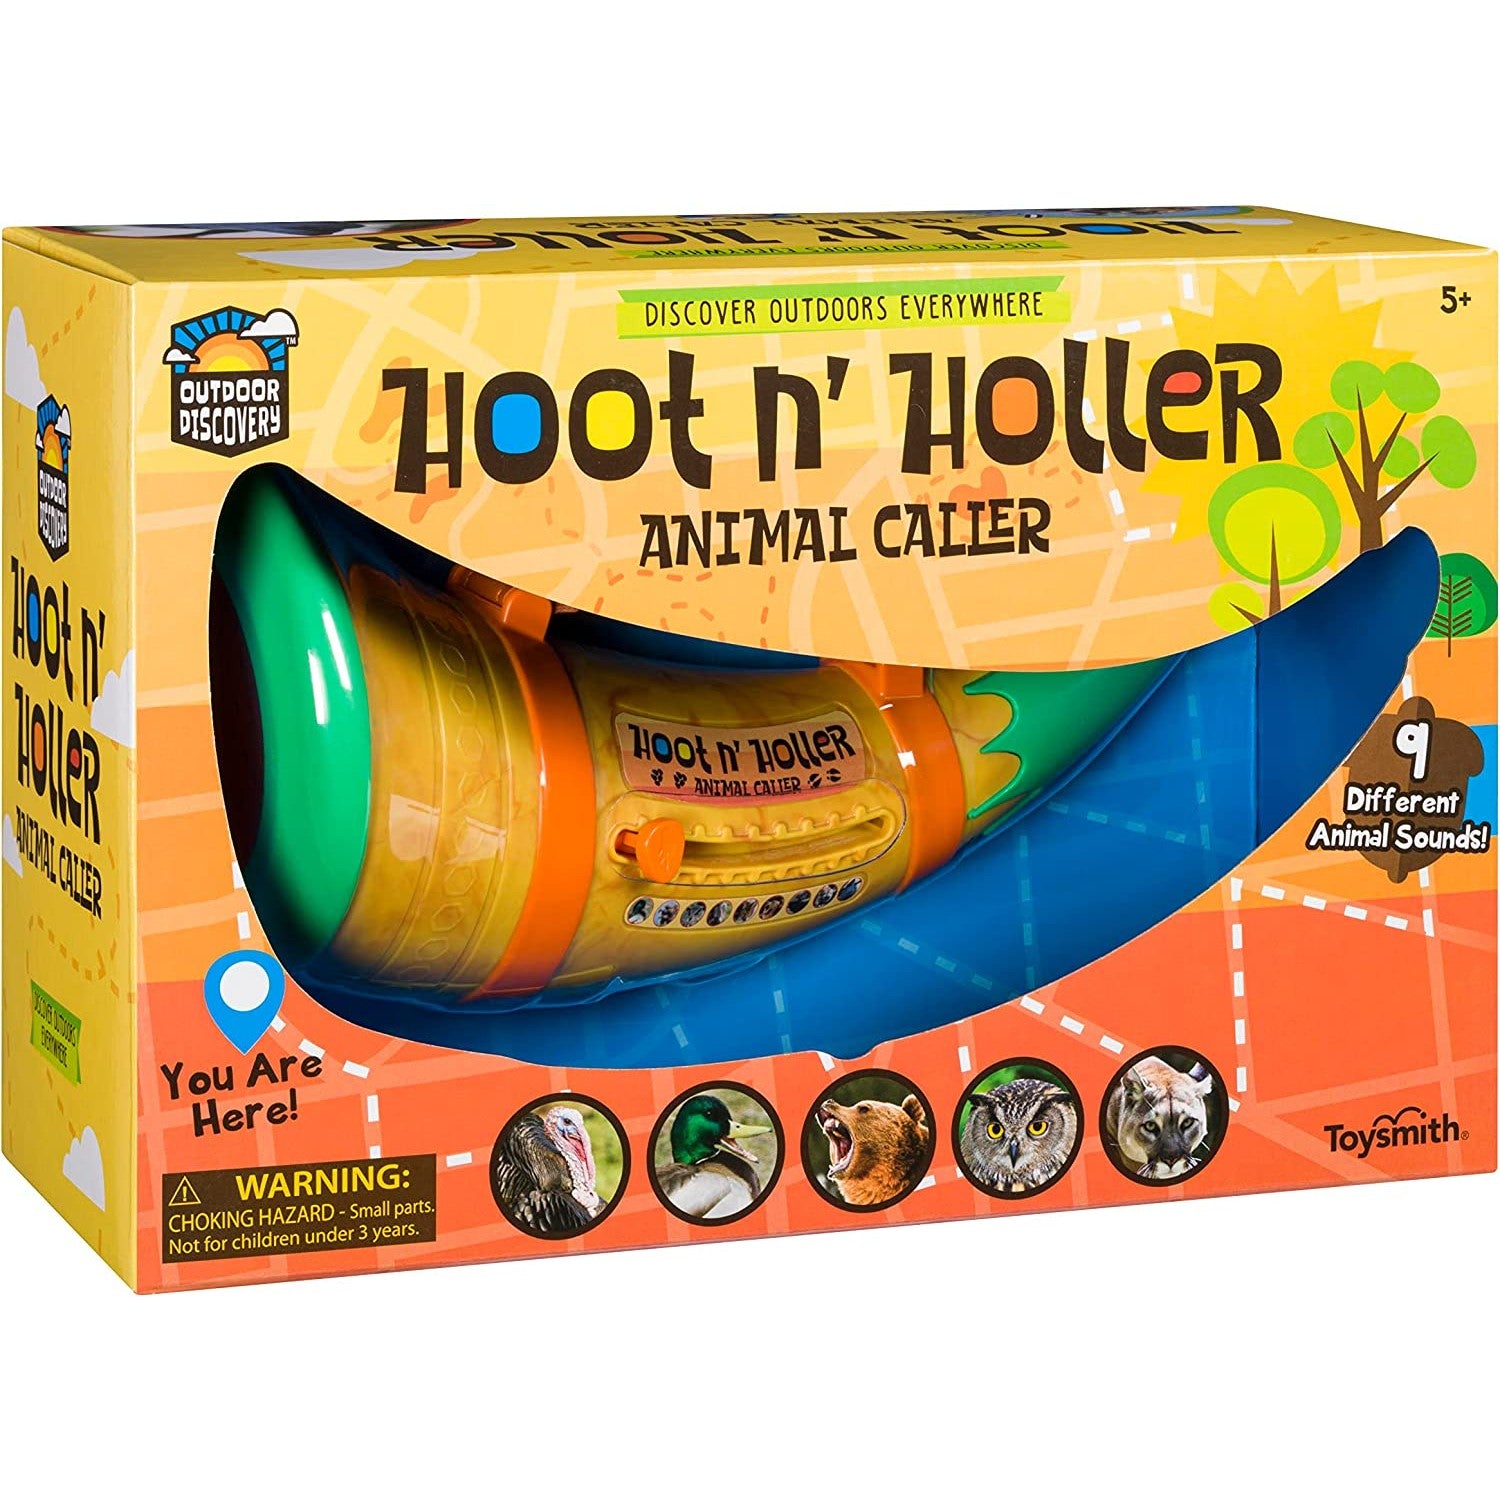 A kids hoot n'holler animal caller toy in its box. There is text which says, '9 different animal sounds.'